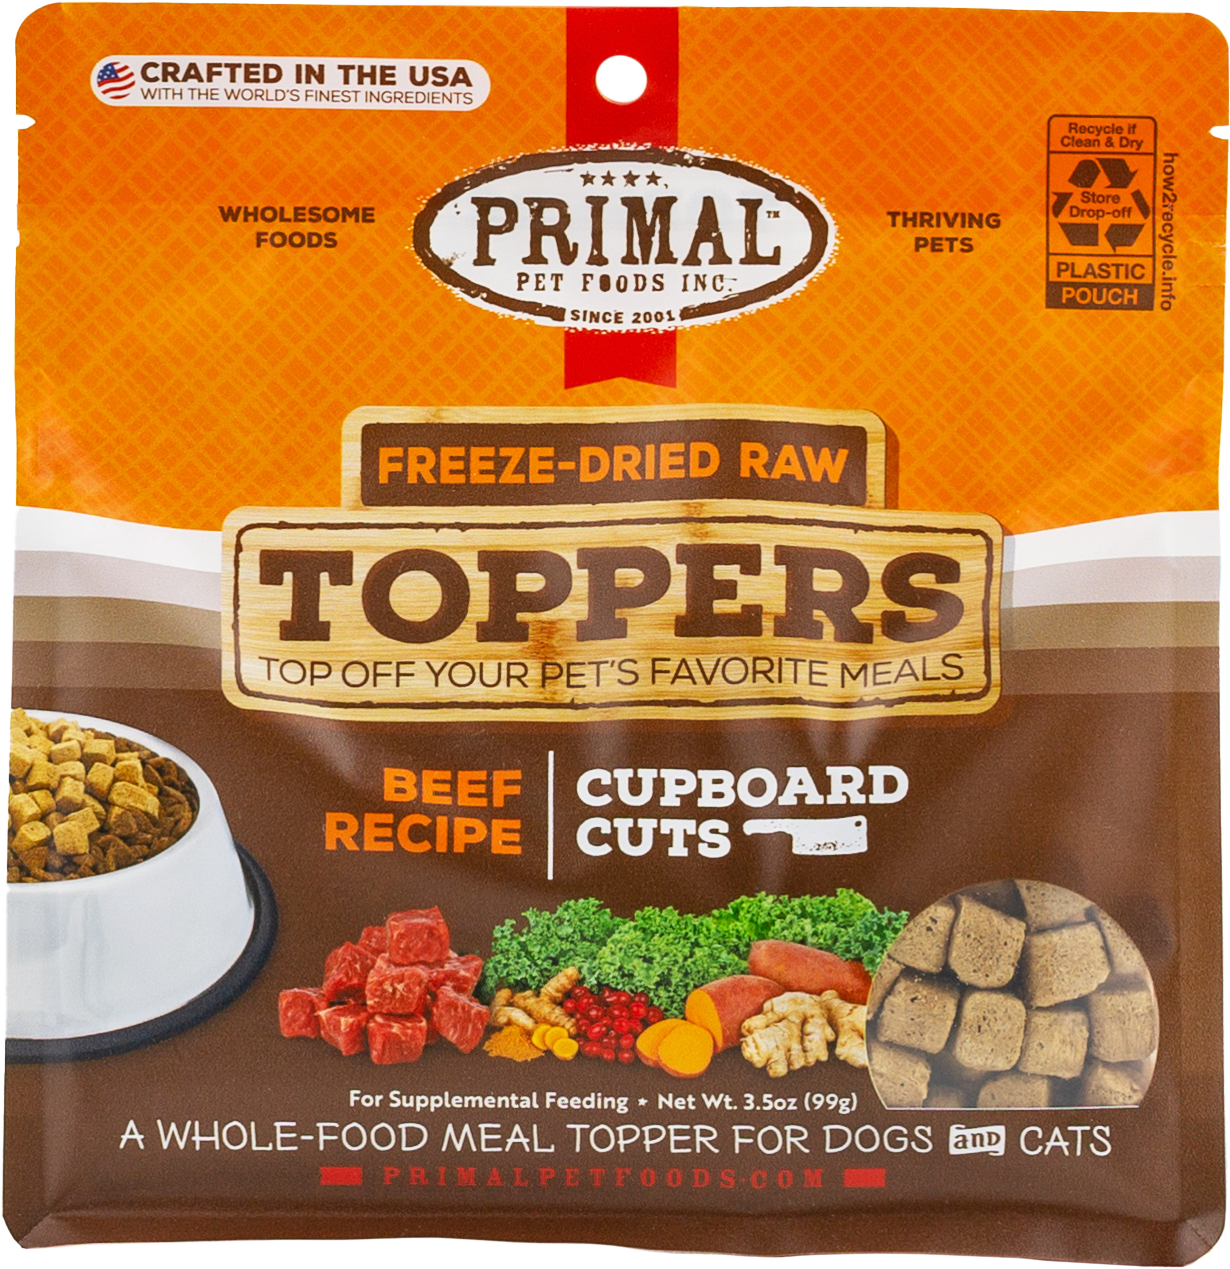 Primal Cupboard Cuts Freeze-Dried Raw Toppers - Beef, 3.5 oz